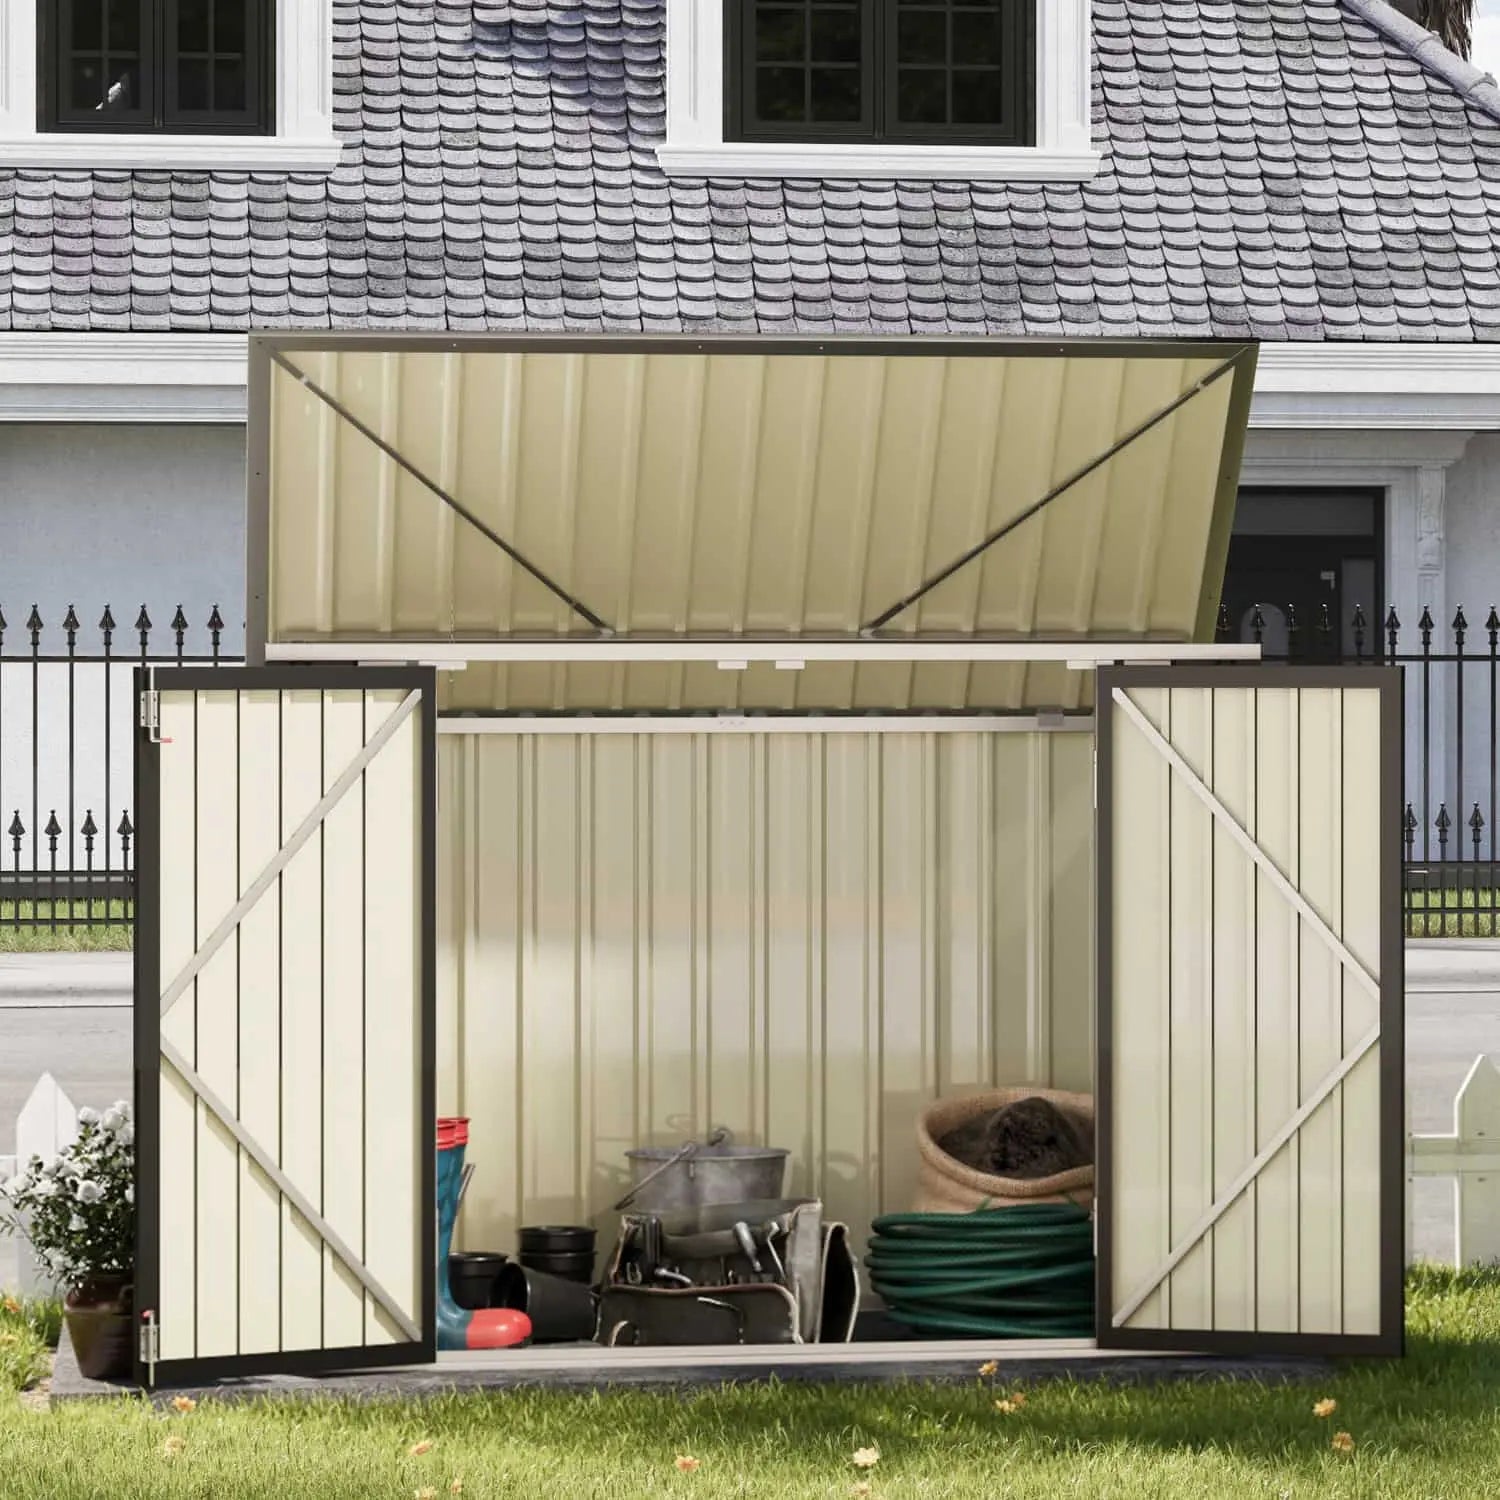 6x3 metal bike storage shed filled with garden tool